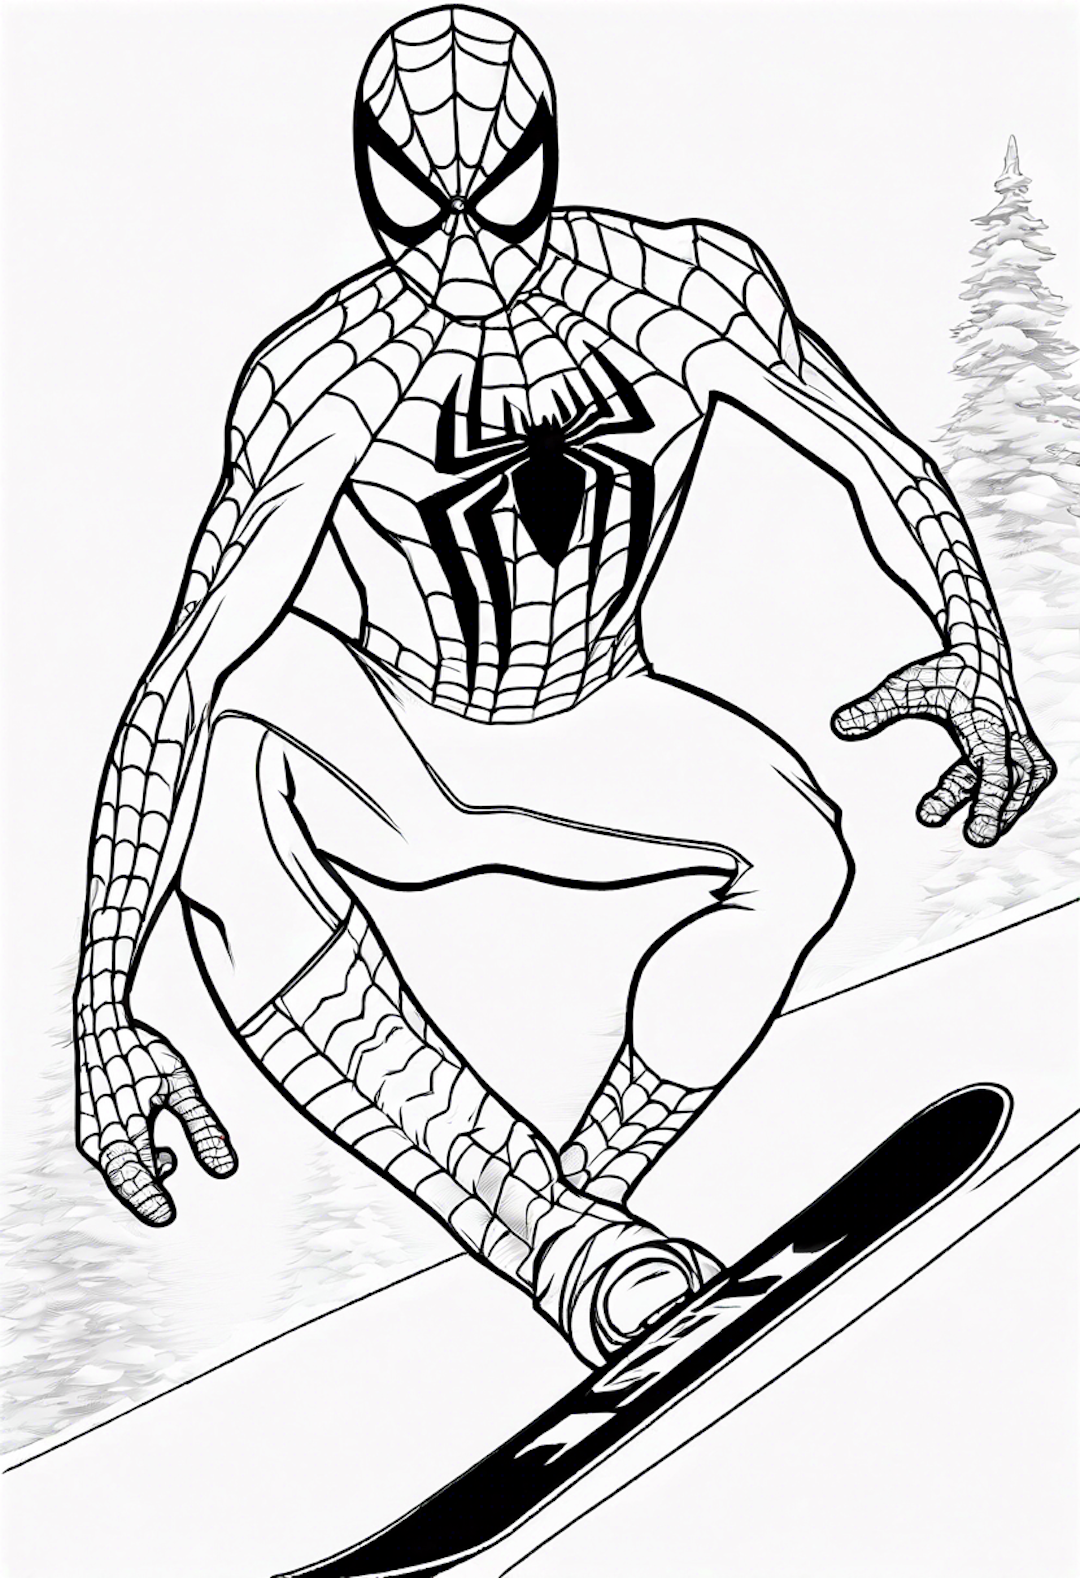 Spiderman In A Snowboarding Race With Iceman